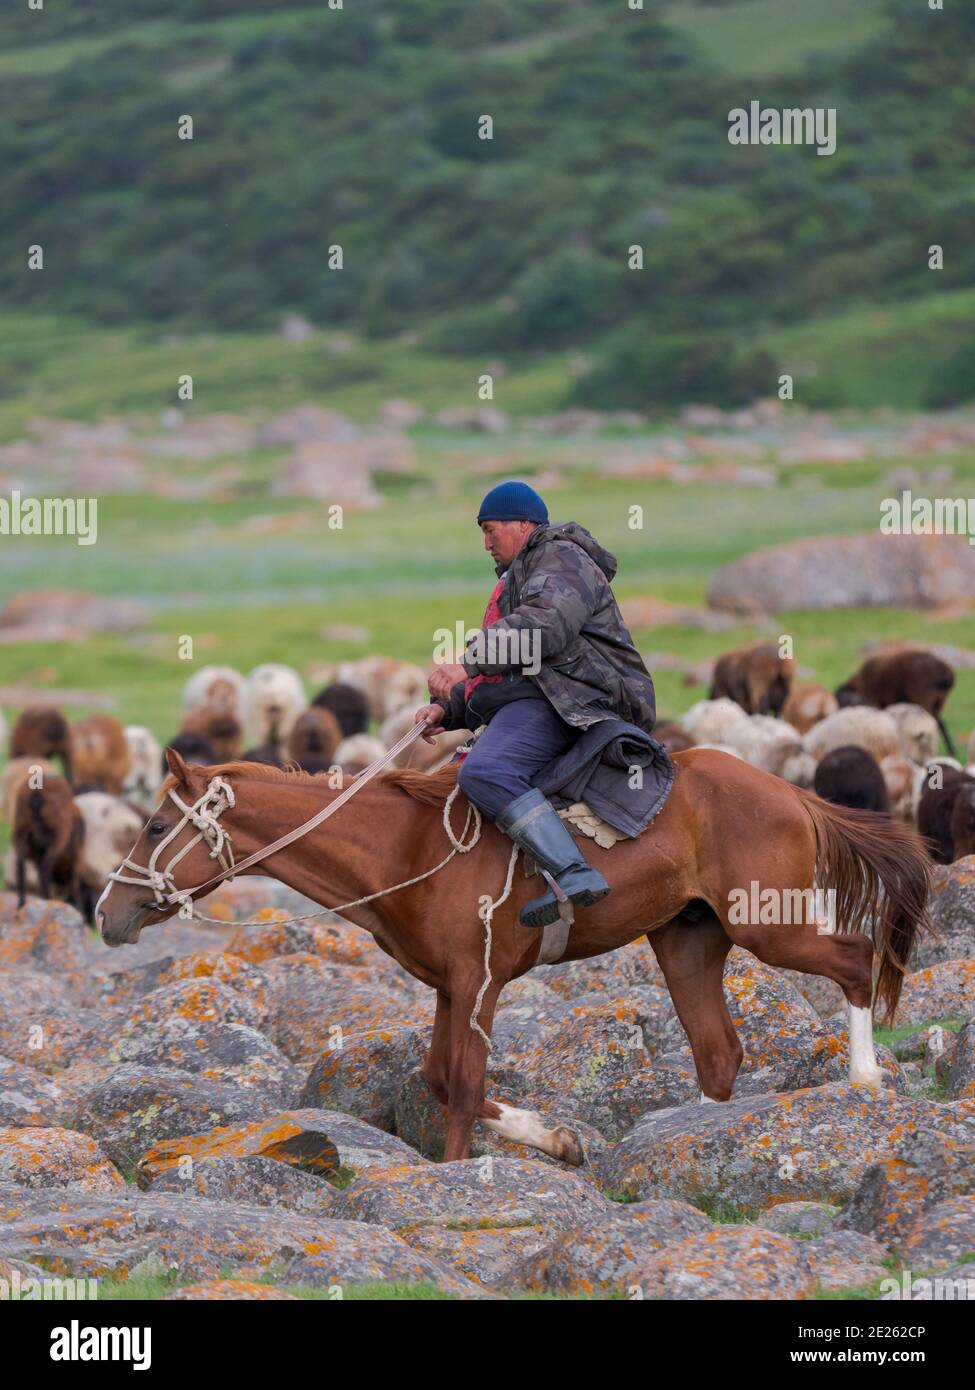 Sheeps with shepherd on horse , grazing on their summer pasture. National Park Besch Tasch in the Talas Alatoo mountain range, Tien Shan or Heavenly M Stock Photo